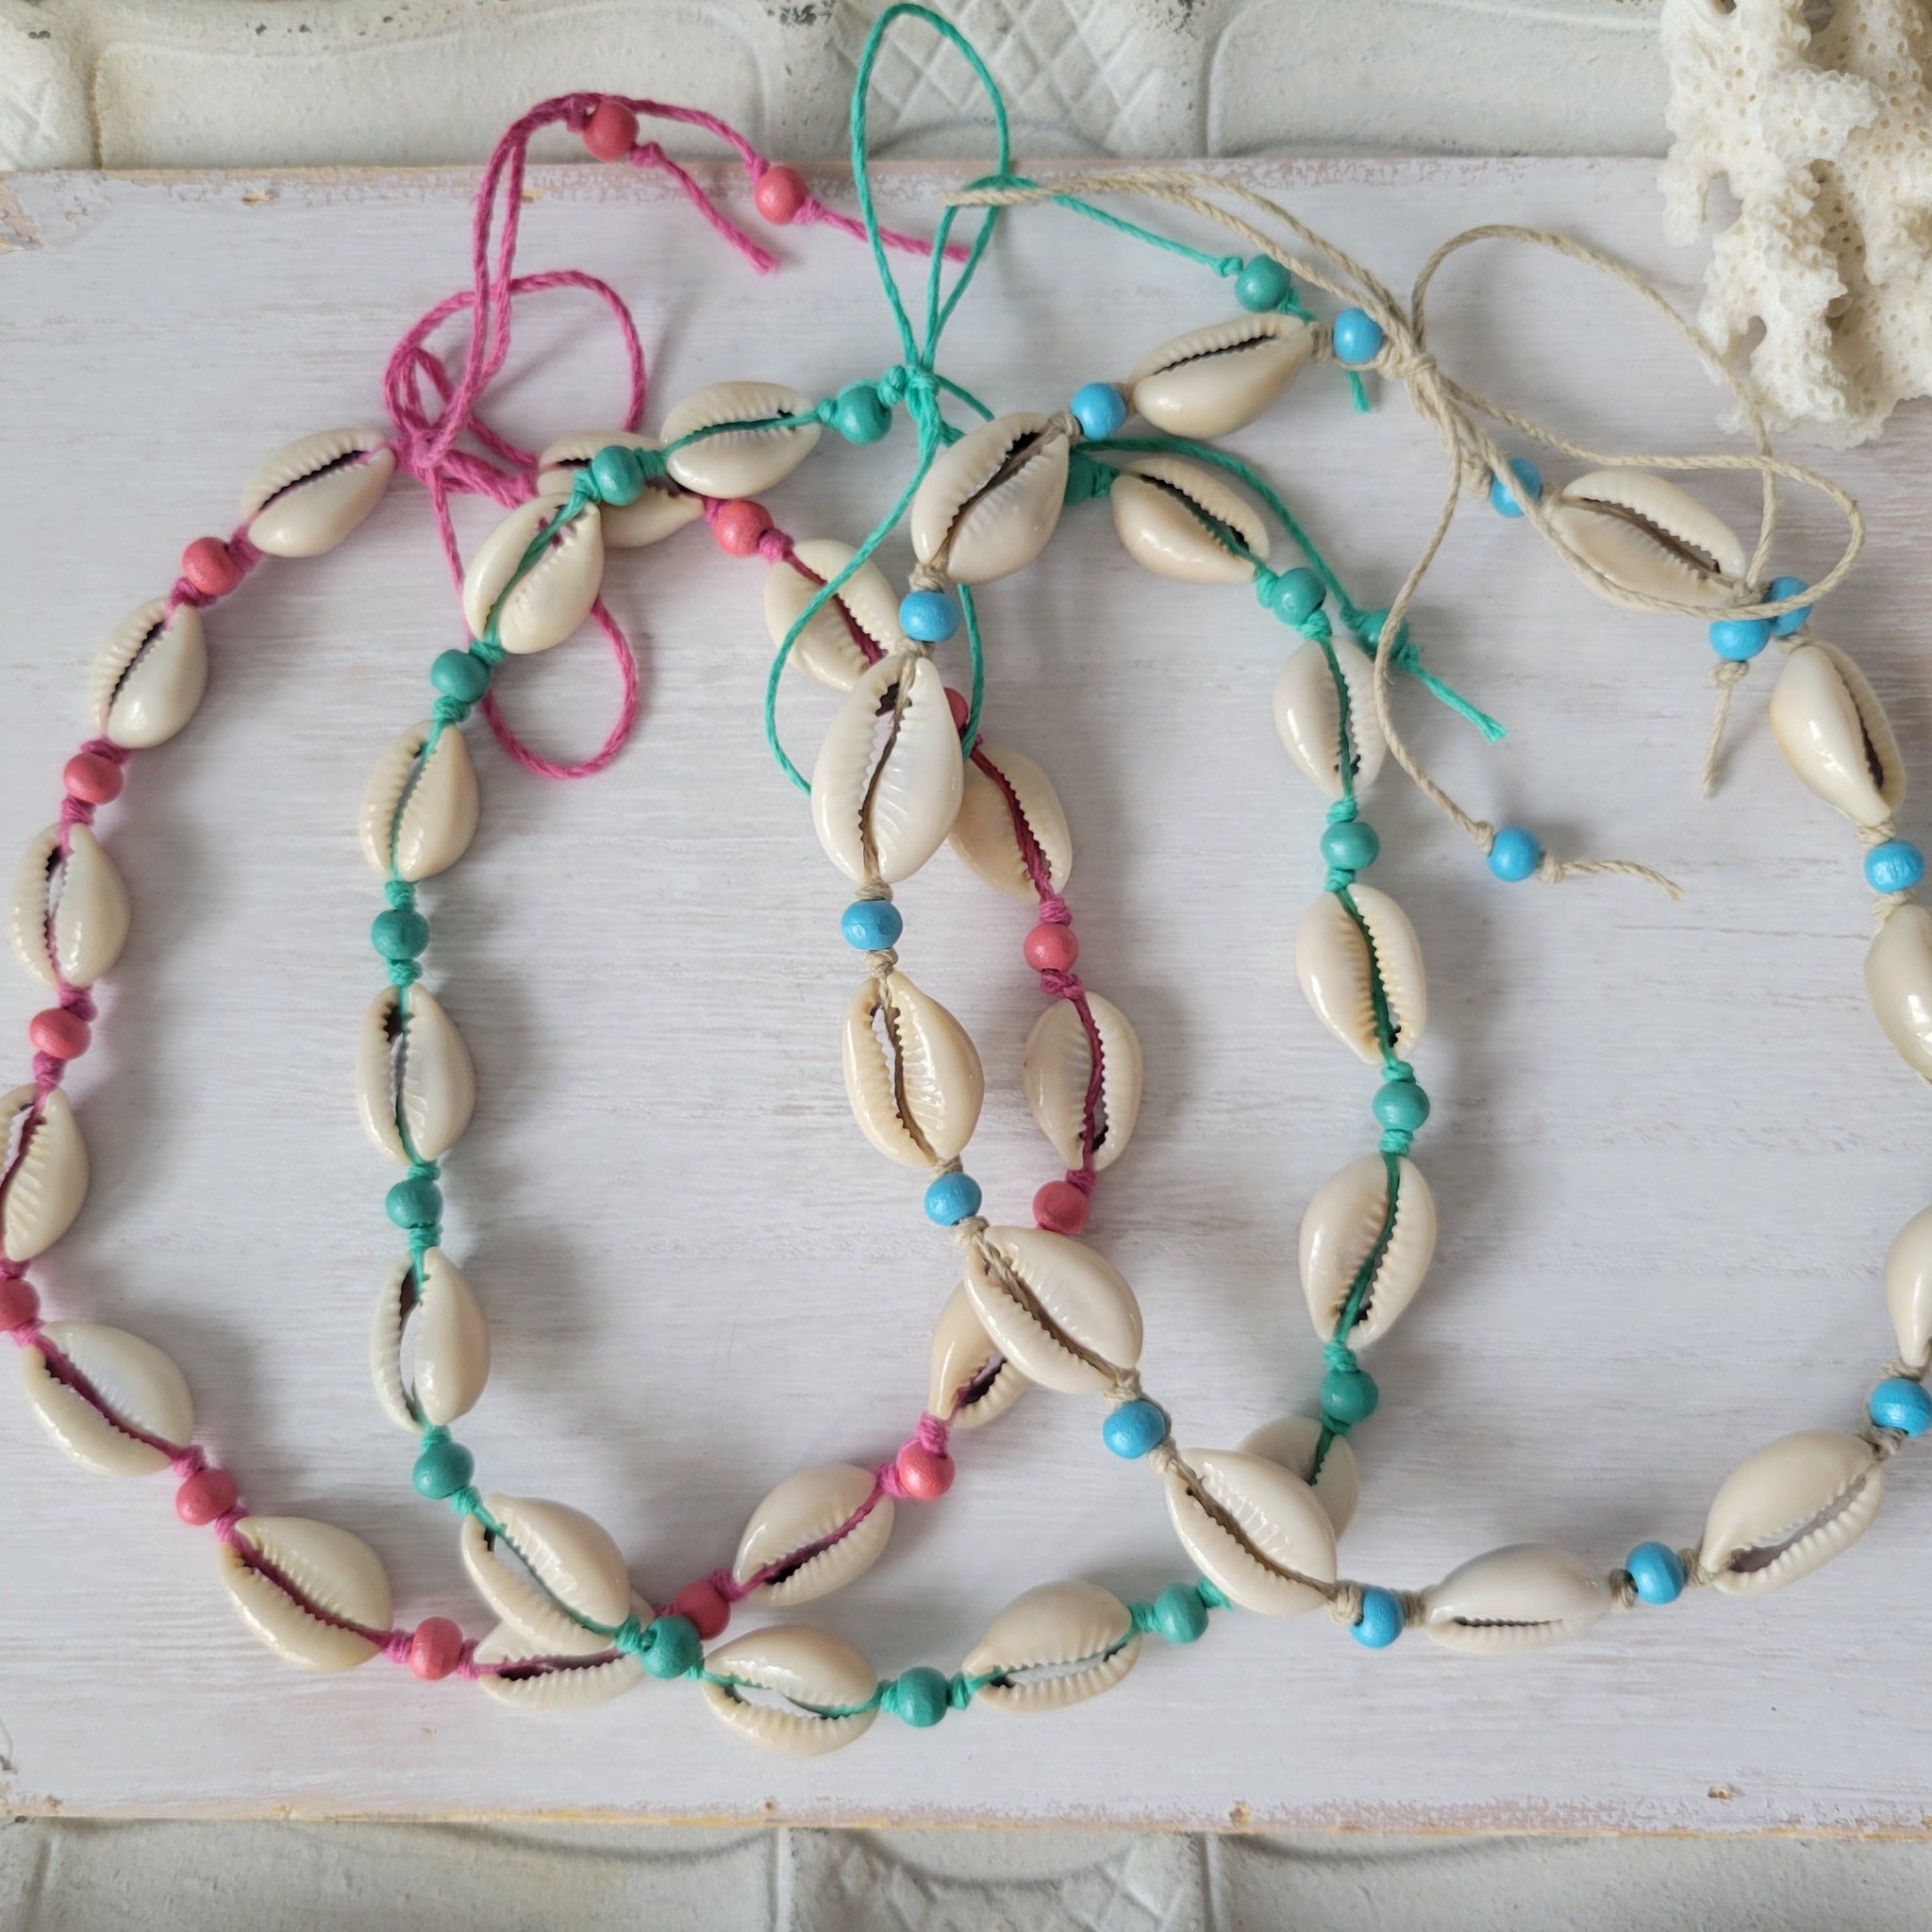 Colored Puka Shell & Bead Jewelry - Necklace, Bracelet or Anklet Options